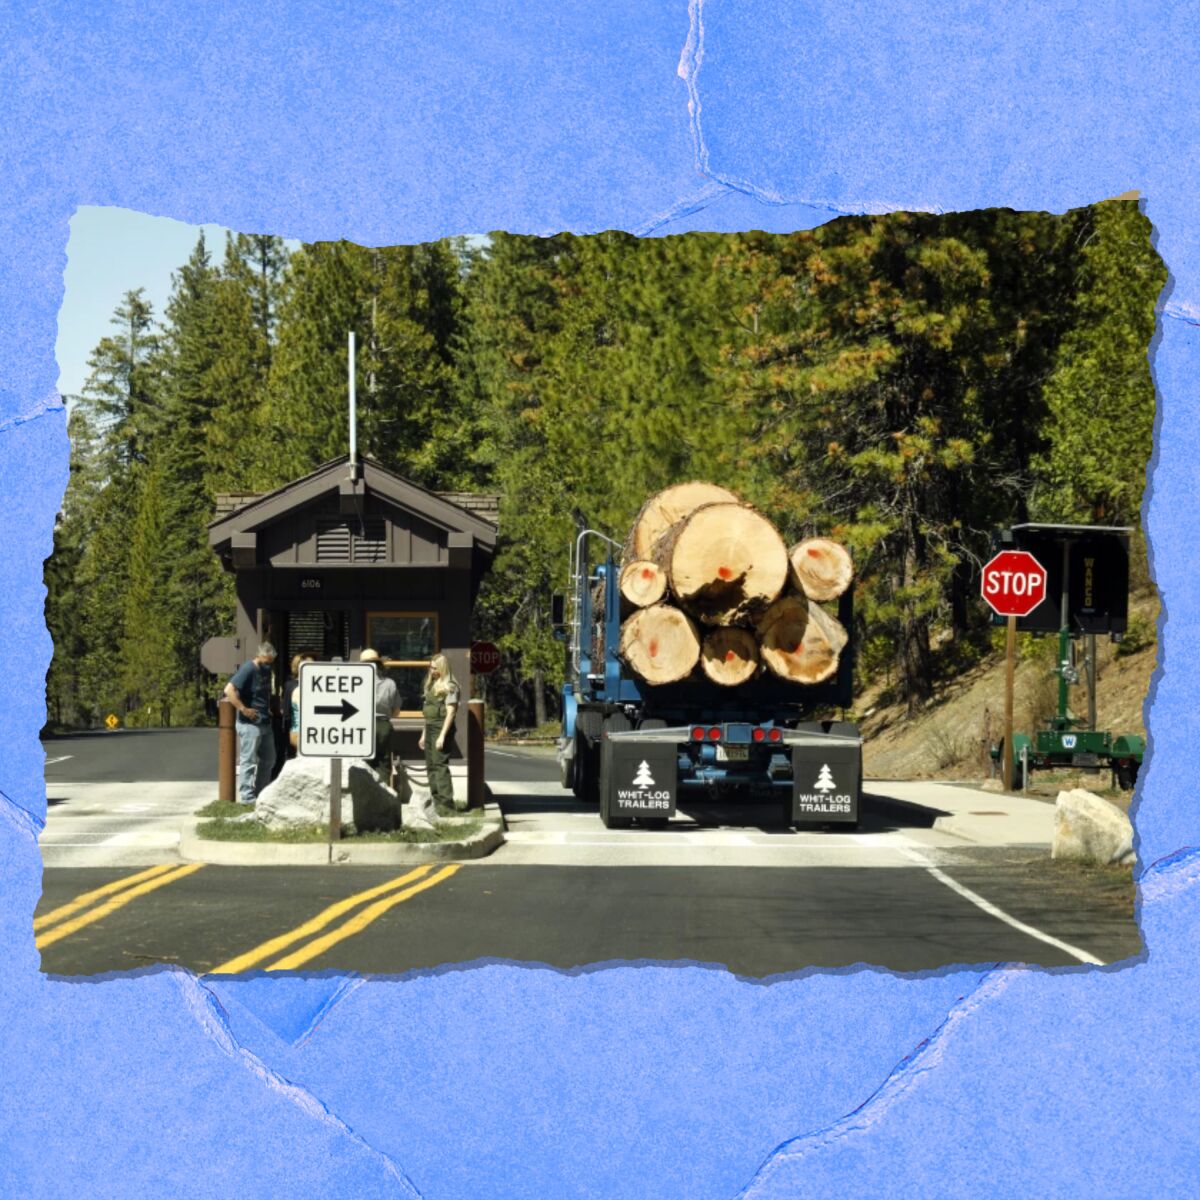 A semi with cut logs stacked in the back pauses at a stop sign.